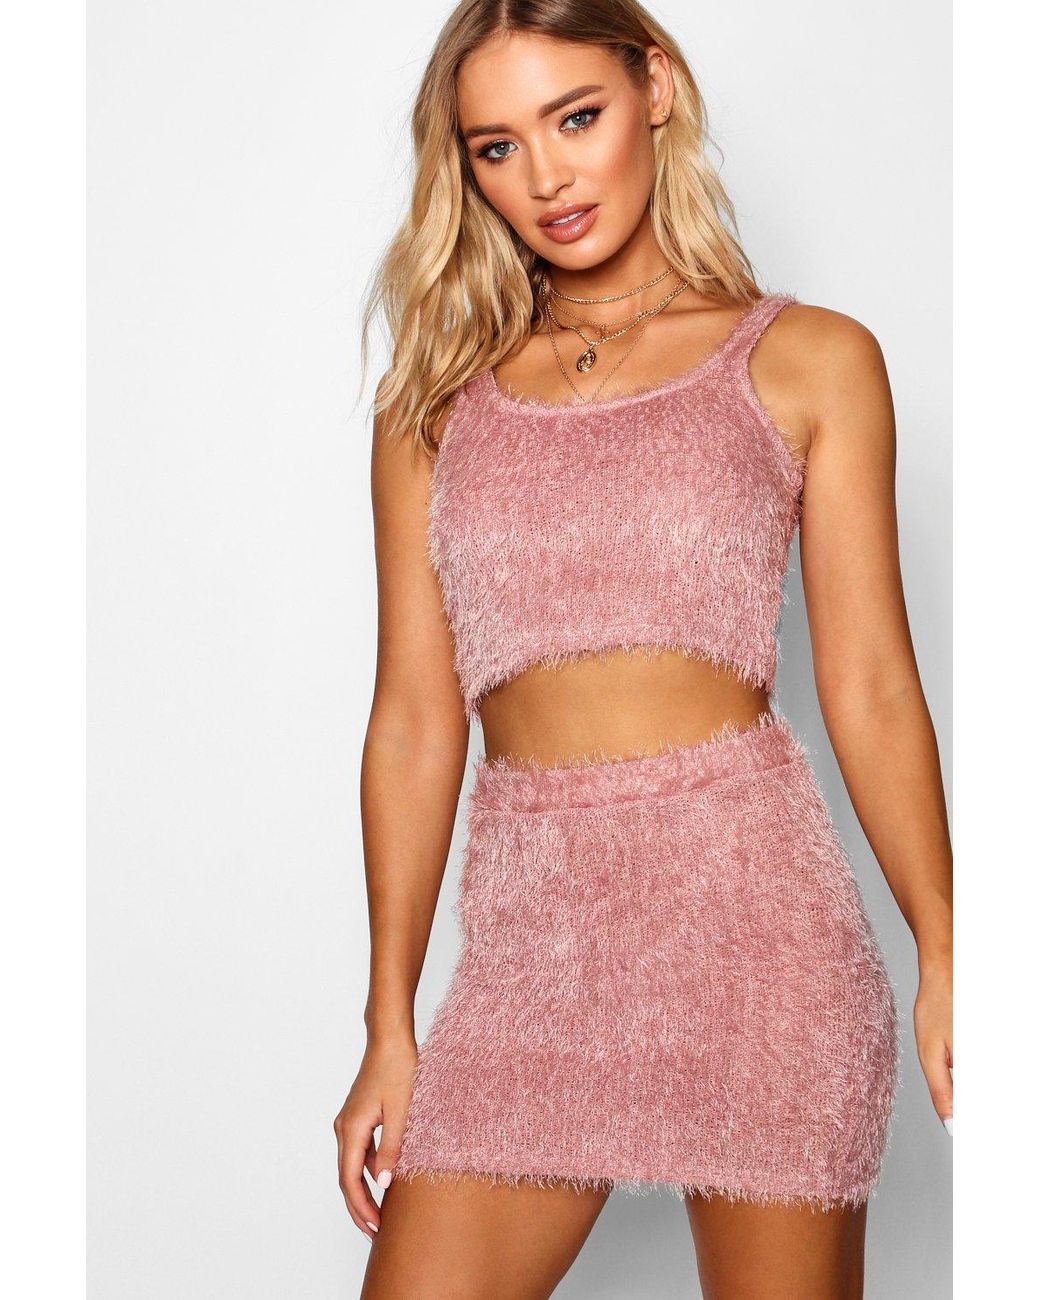 Boohoo Fluffy Knitted Crop Top Knitted Mini Skirt Set in Pink | Lyst